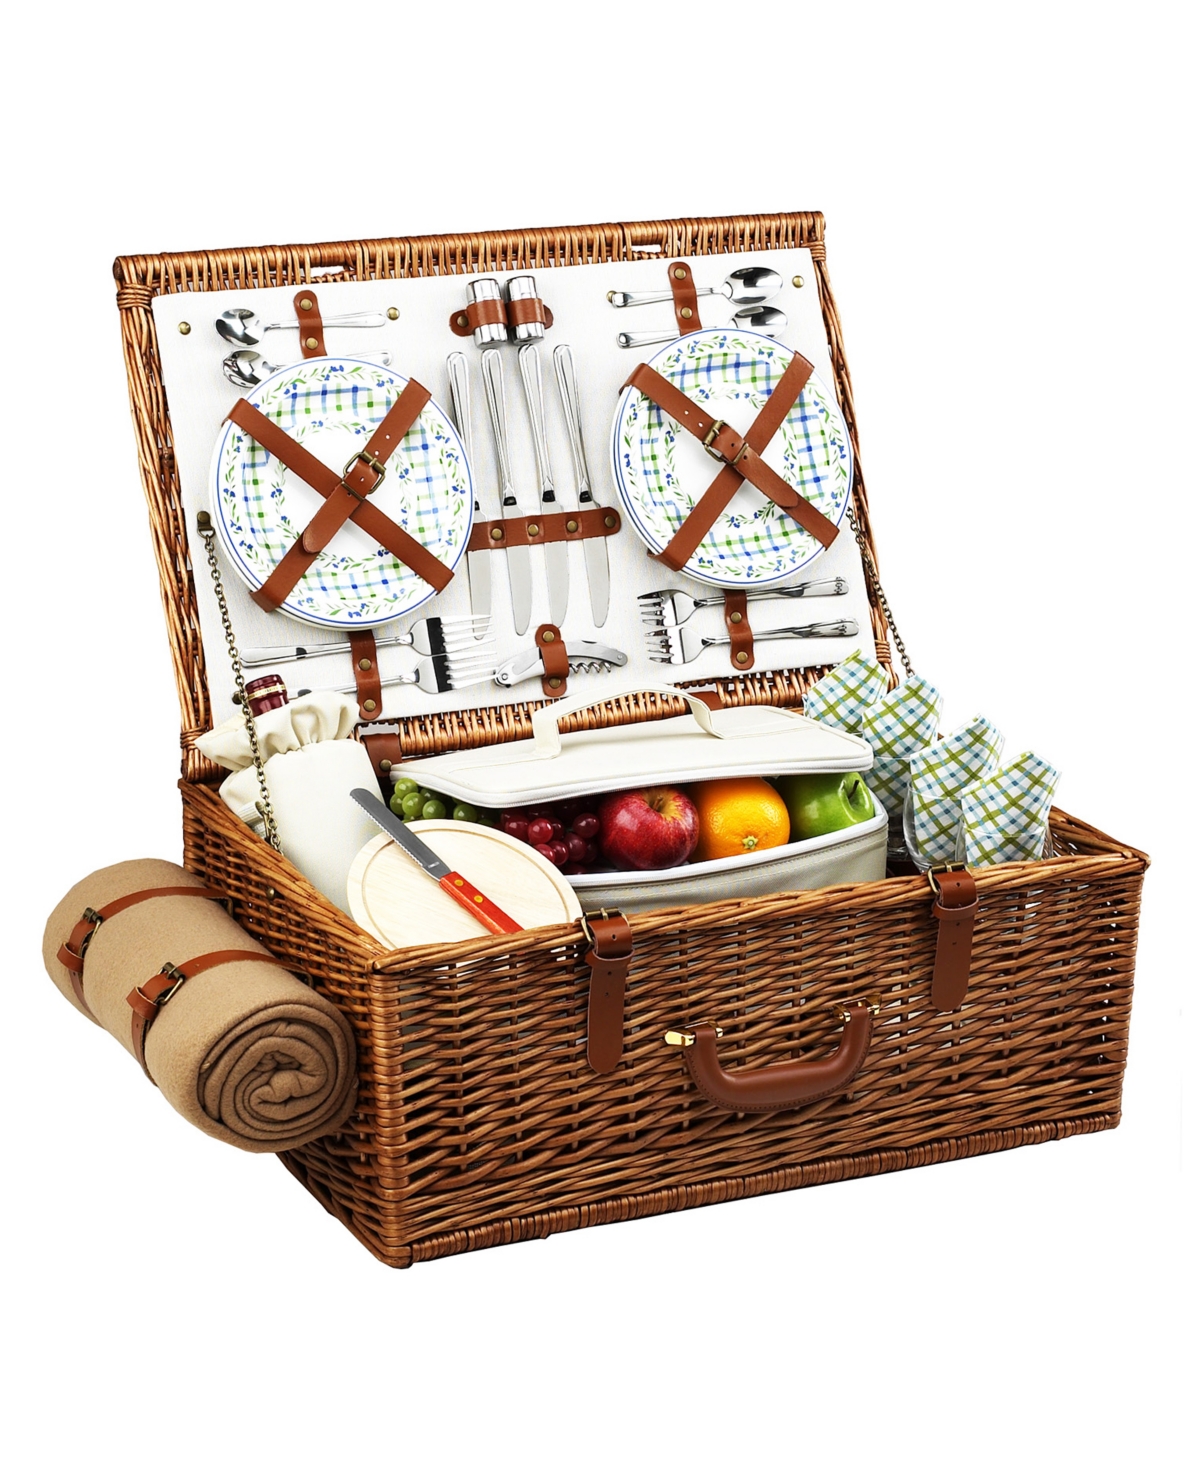 Dorset English-Style Willow Picnic Basket for 4 with Blanket - Turquoise